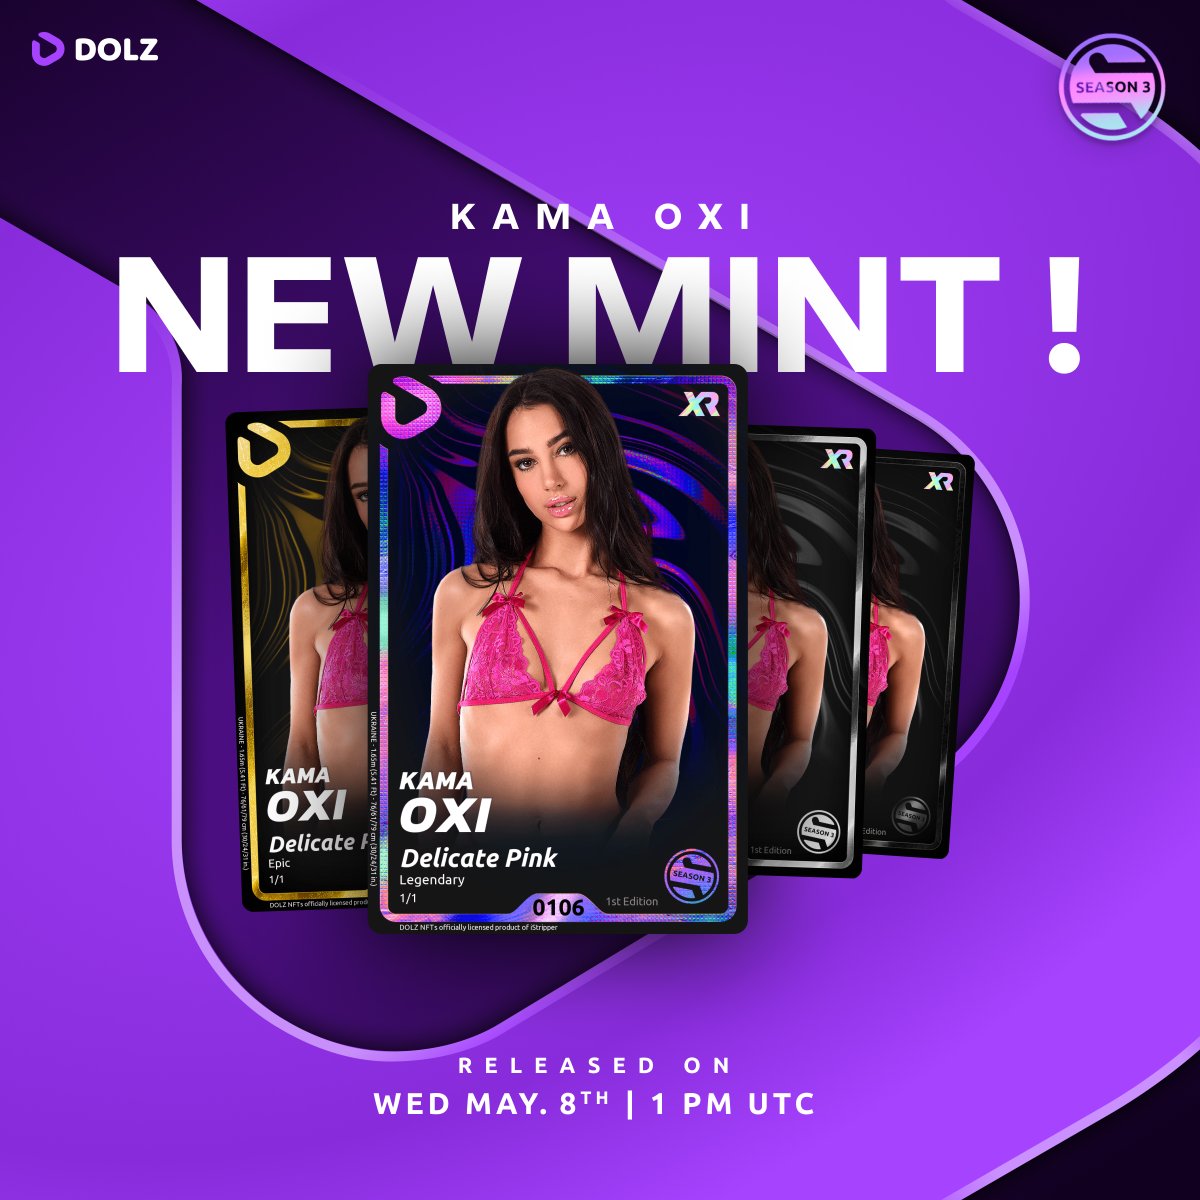 🟣 SEASON 3 | XR Card #10 Wed. May 8th, 1 PM UTC Prepare for a sweet evening 🎀 Meet DOLZ remarkable performer @kama_oxi and her latest show: Delicate Pink! Supply: only 700 NFTs Mint Price: 1 000 $DOLZ Max. per wallet: 5 NFTs Mint her XR cards & grab the rarest editions among…